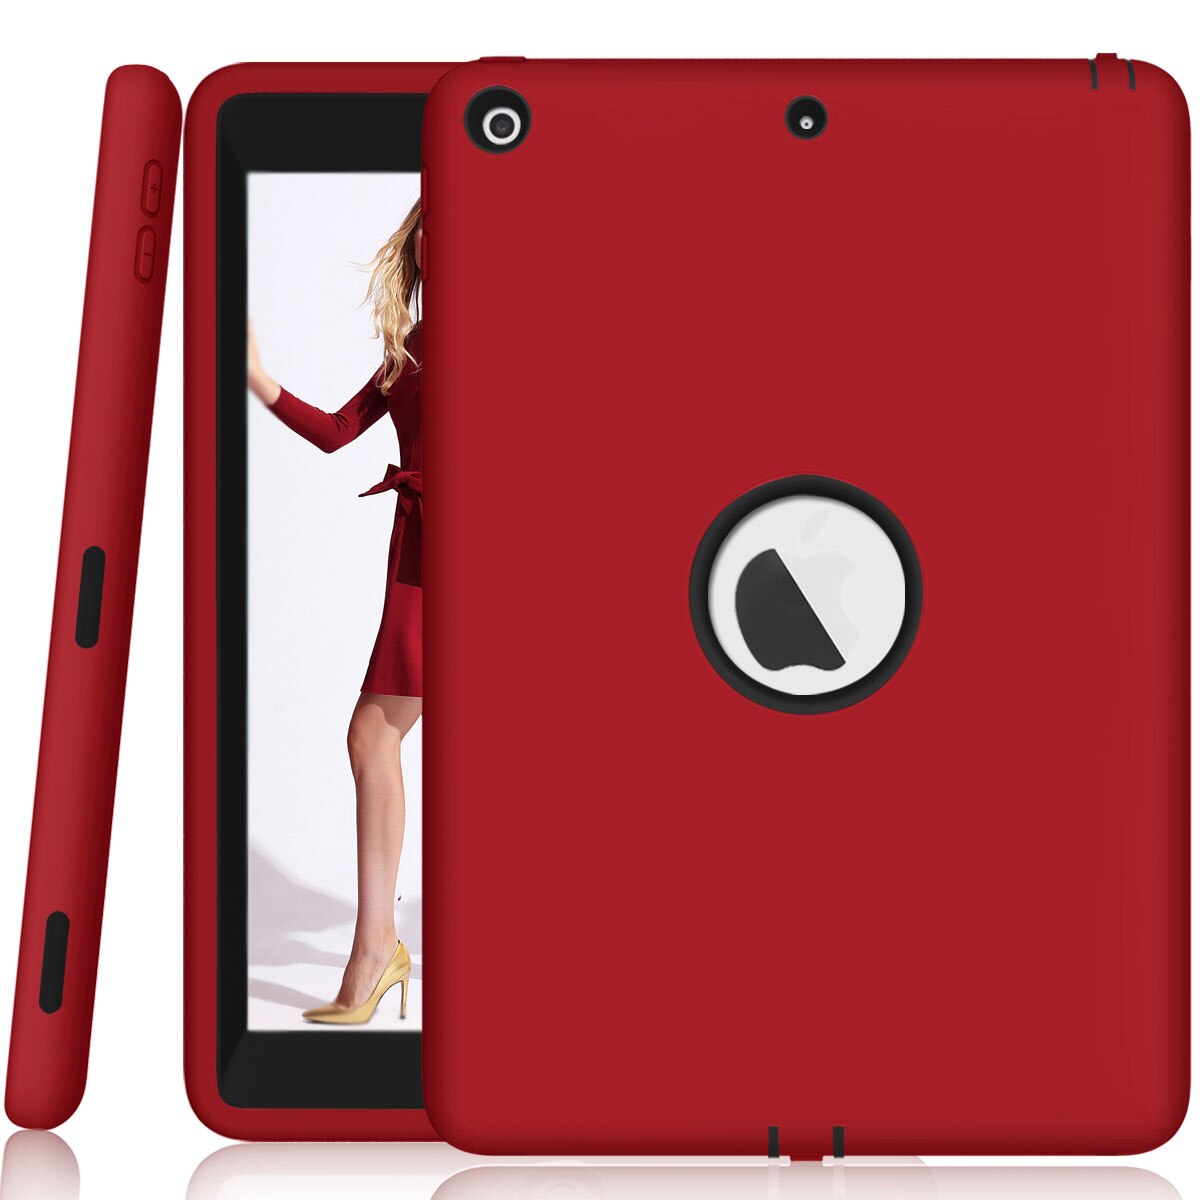 For New iPad 9.7" 2017 Case Cover, High-Impact Shock Absorbent Dual Layer Silicone+Hard PC Bumper Protective Case A1822/A1823 - 200001091 Red and Black / United States Find Epic Store